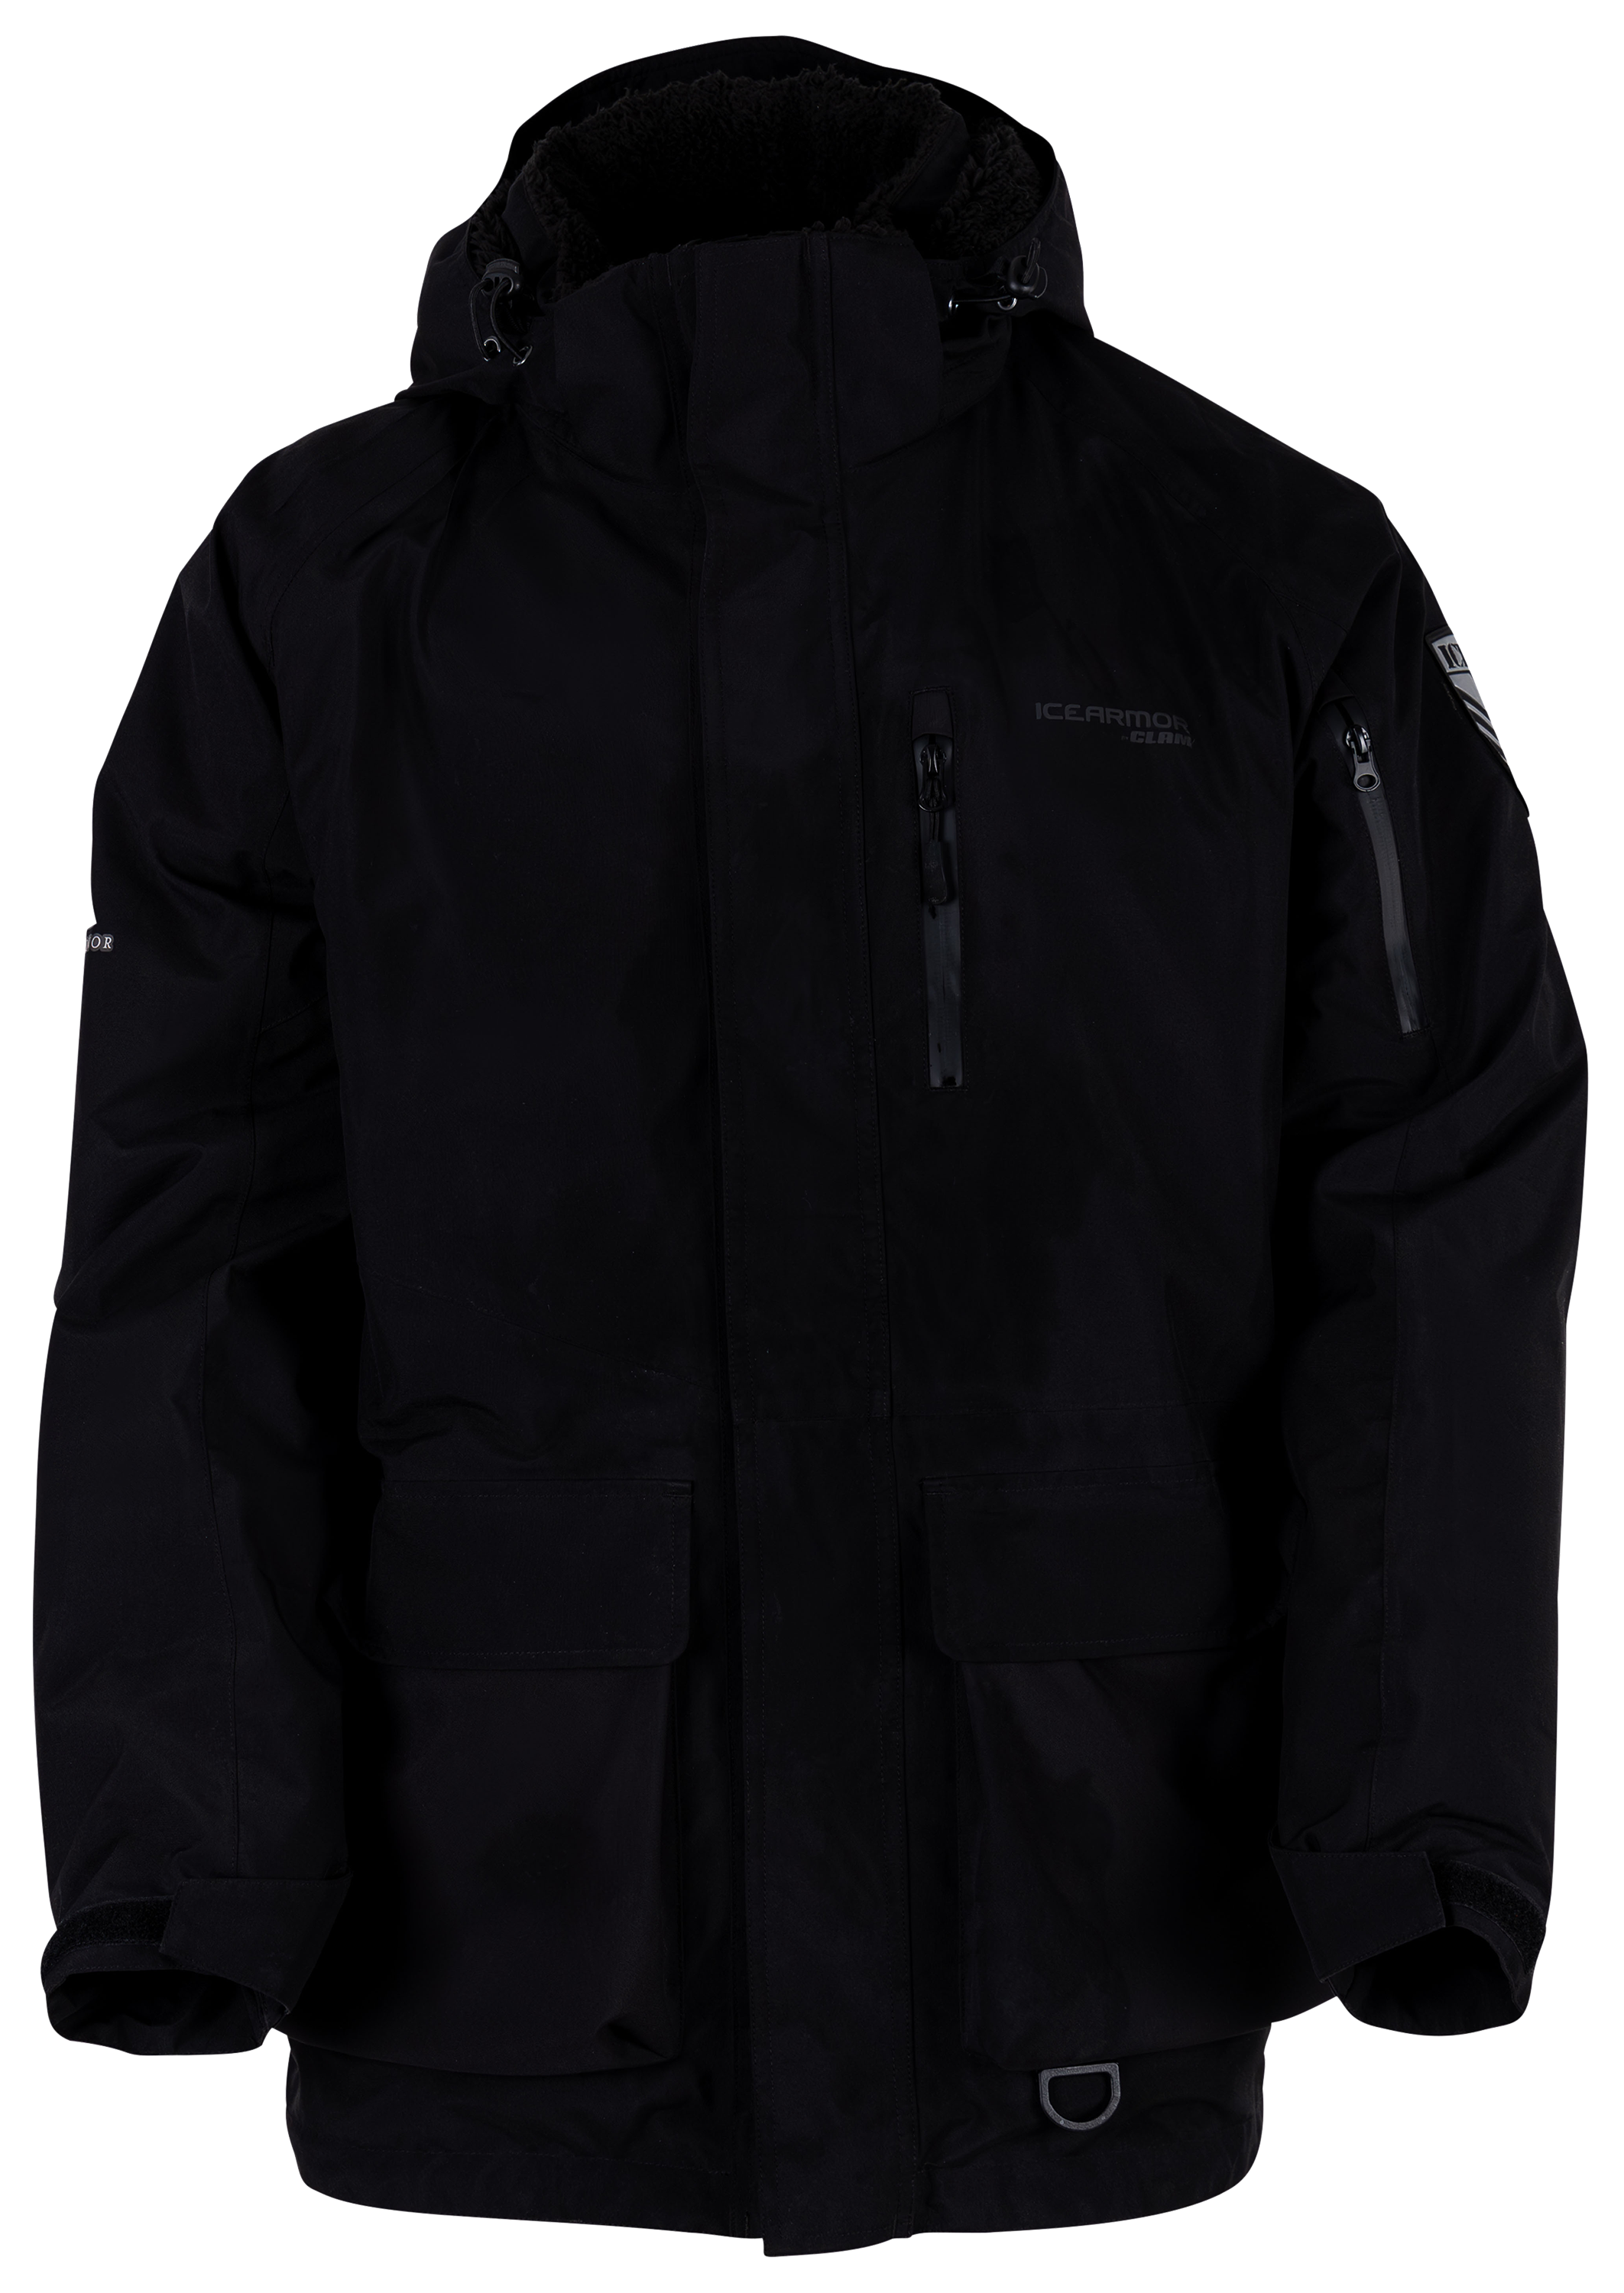 Icearmor by Clam Delta Float Parka for Men